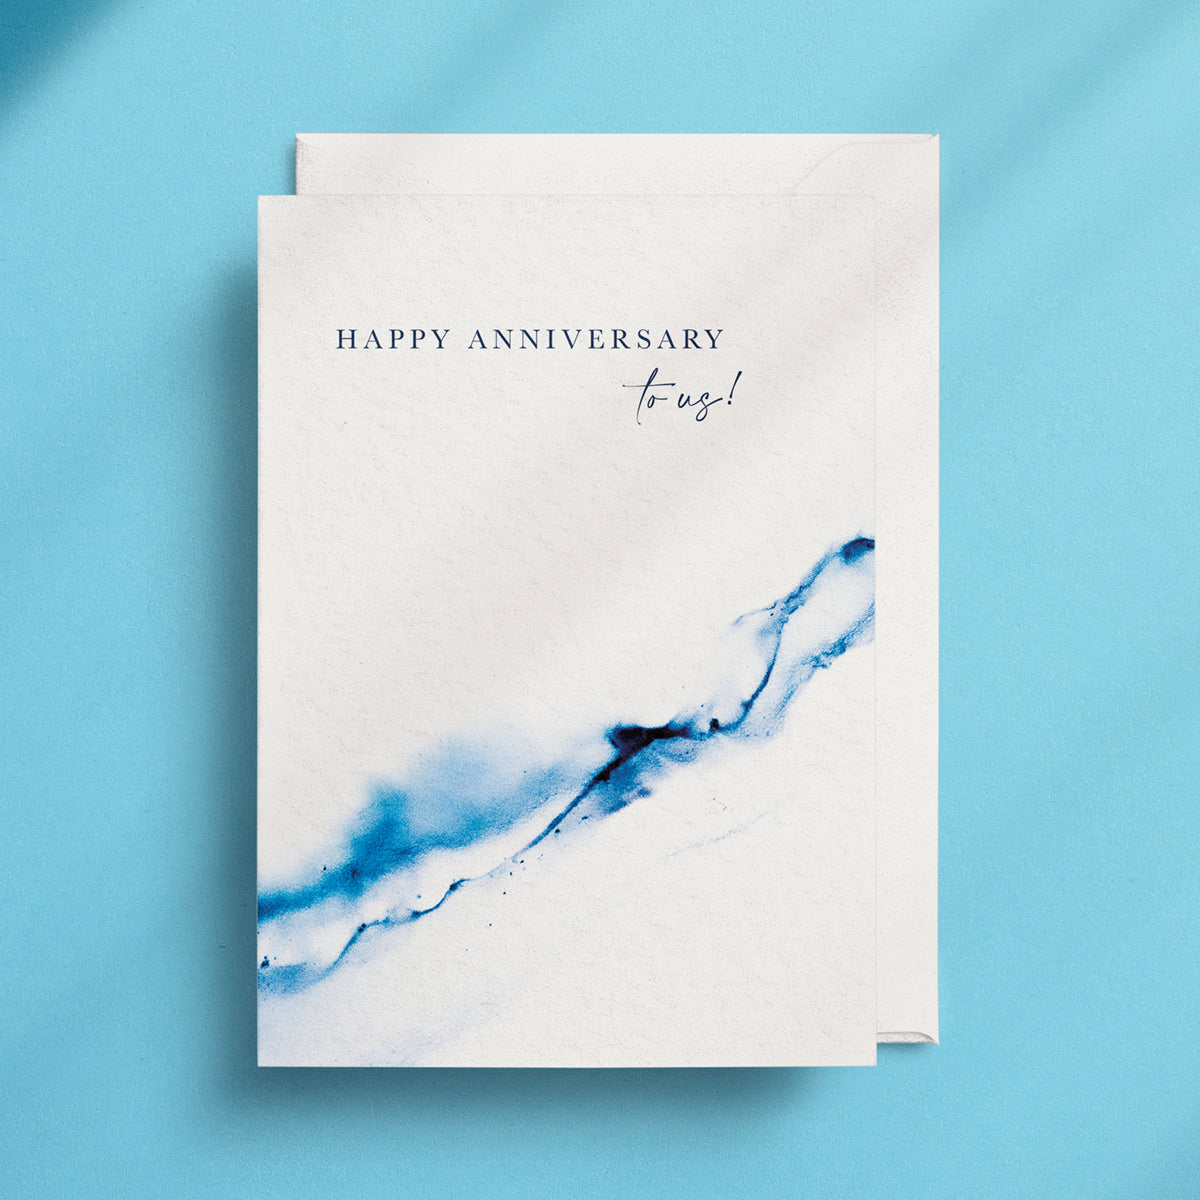 Happy Anniversary To Us! - Greeting Card